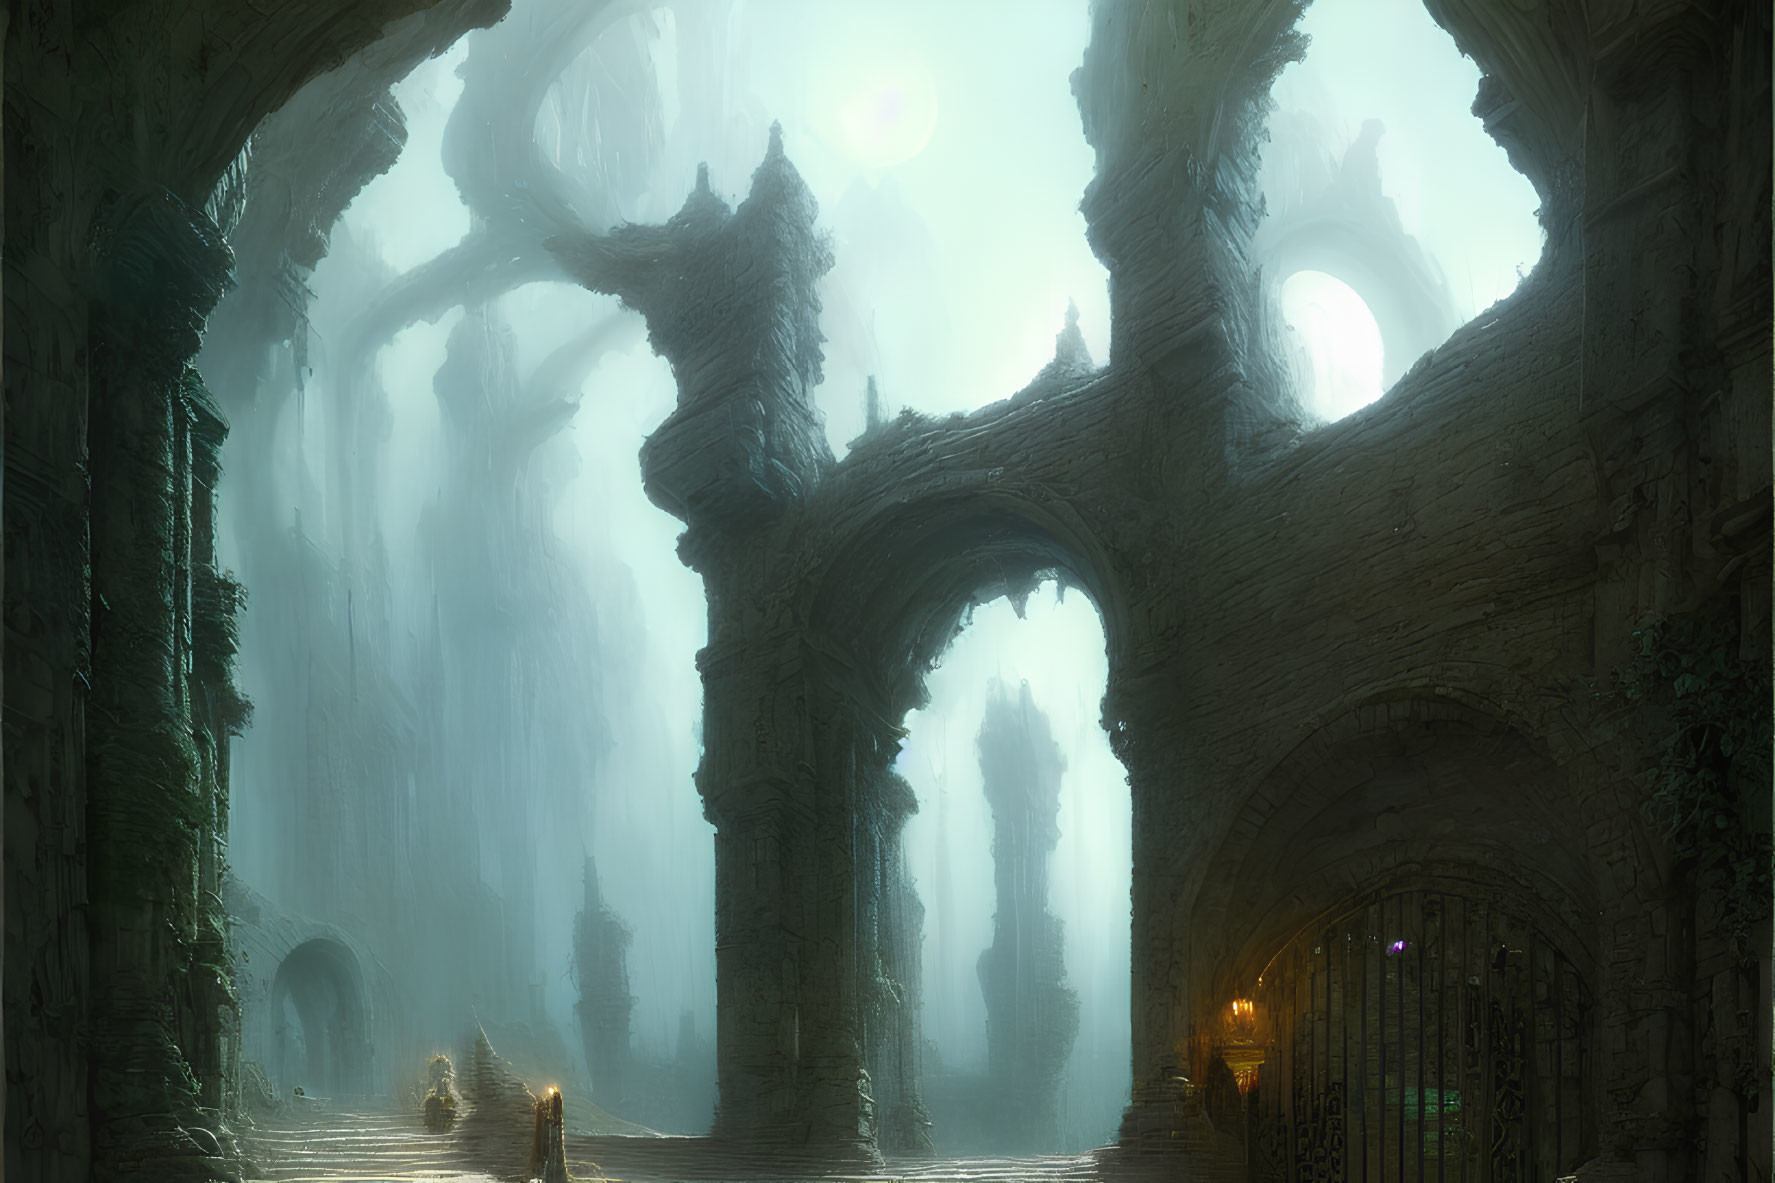 Ethereal ancient ruin with towering arches and misty atmosphere.